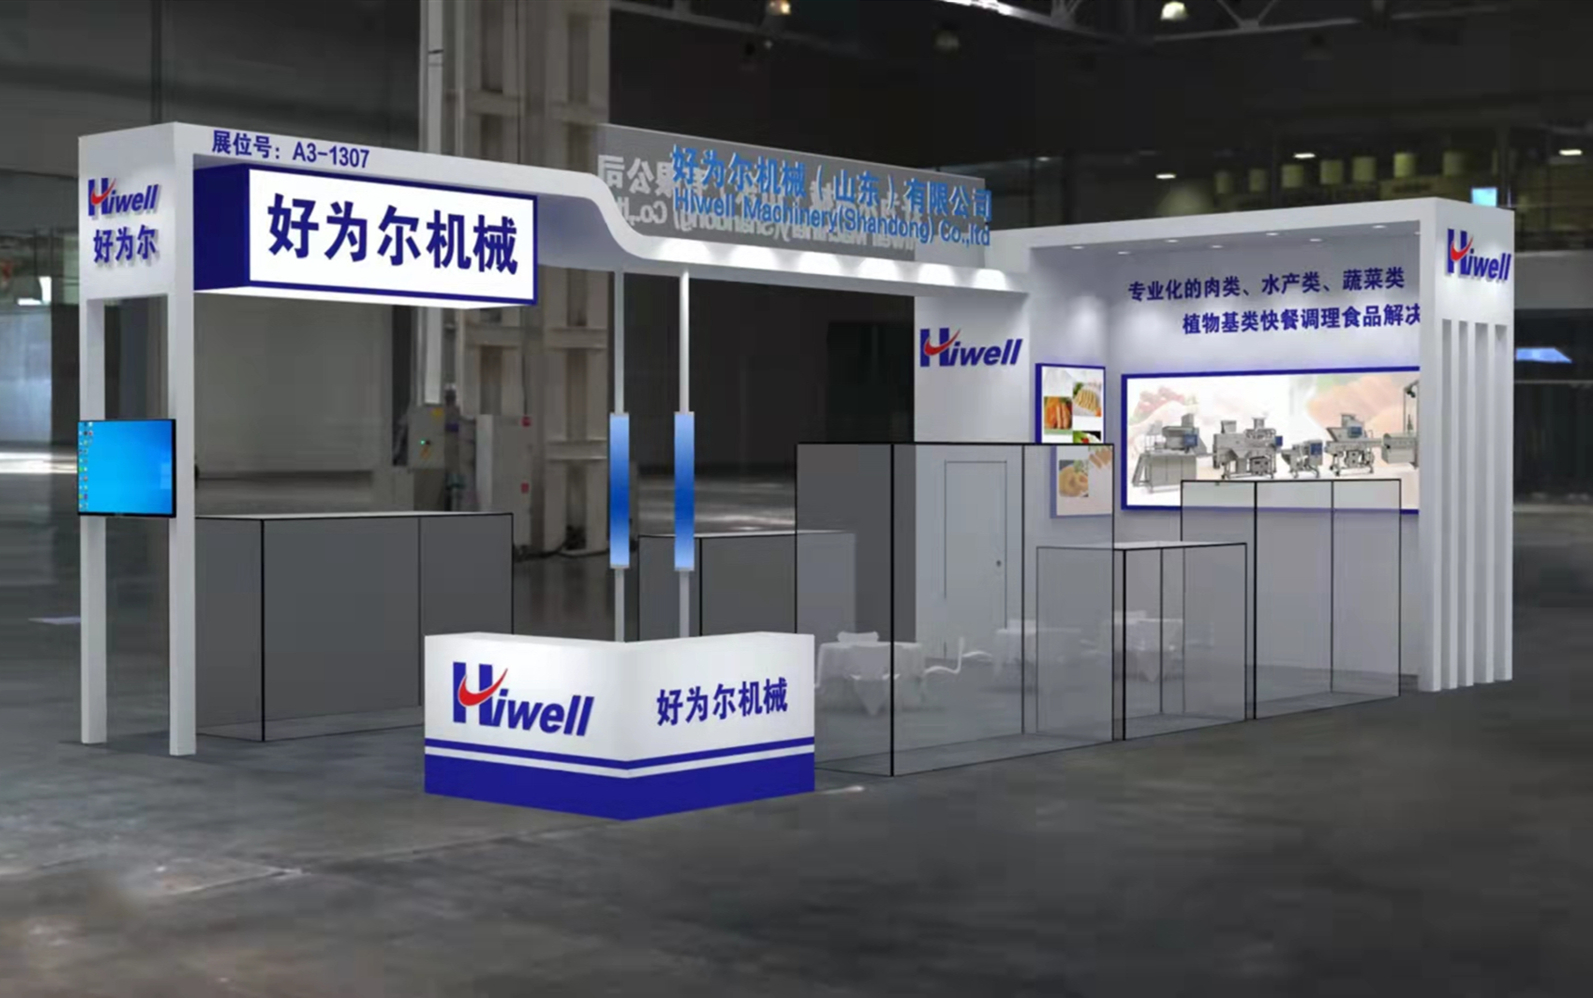 Hiwell attened the 2021 China Fisheries & Seafood Expo.